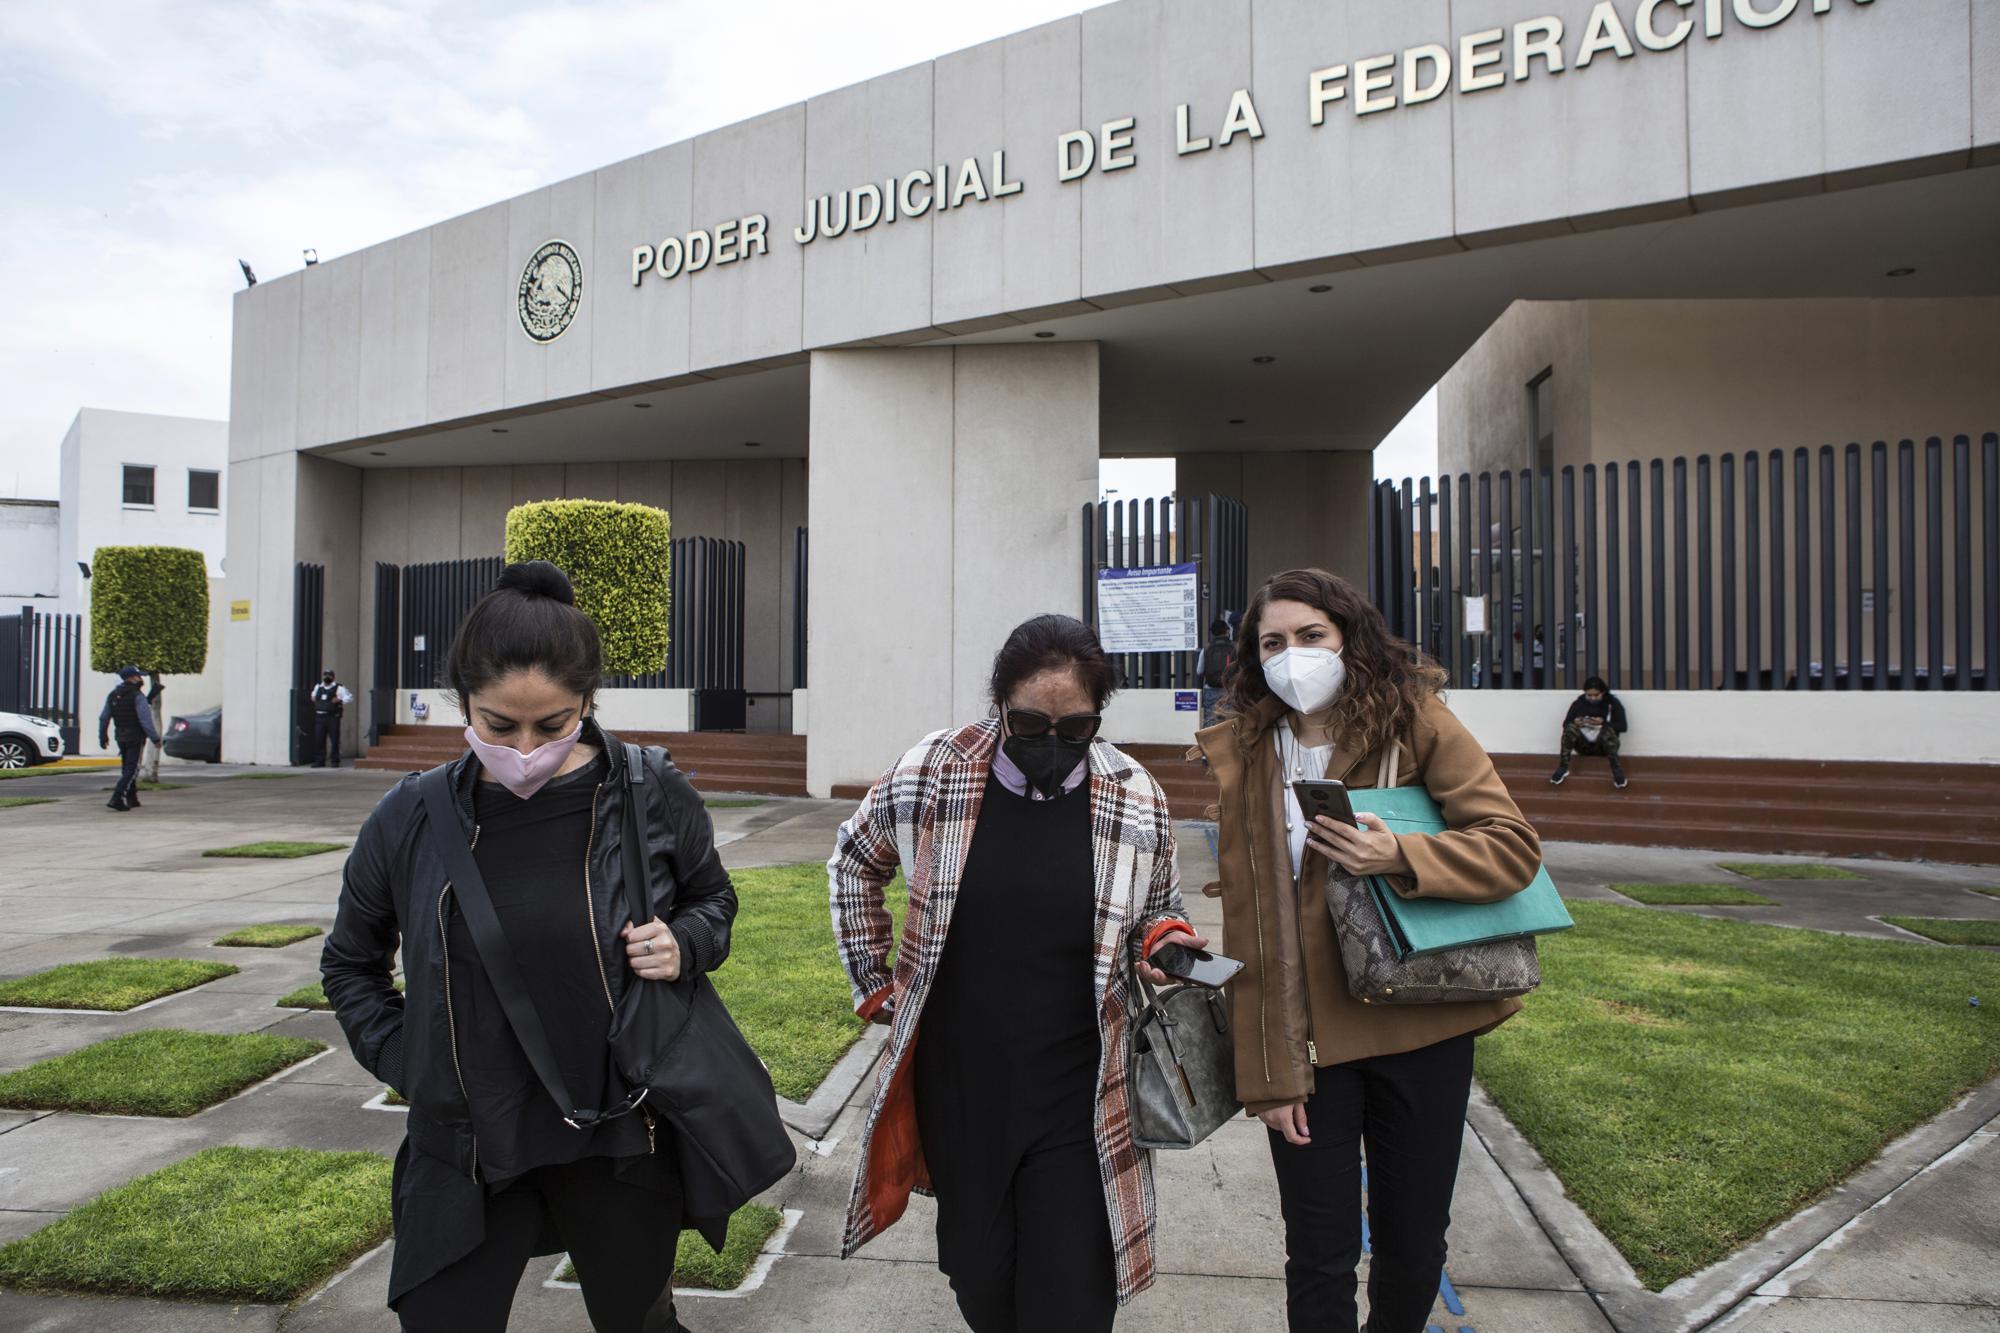 Carmen Sánchez, who survived an acid attack by her ex-partner seven years ago when she was 30, walks between her psychologist Jazmín Ramírez, left, and lawyer Jimena Saavedra, as they leave the Federal Judicial Branch building in Ciudad Nezahualcóyotl, State of Mexico, Mexico, Friday, July 22, 2021, after the court cancelled a hearing with Carmen's attacker amid an ongoing investigation into classifying her attack as an attempted femicide. Sanchez started a foundation that bears her name, seeking justice in her case, talking with other survivors, seeking out donors, psychologists and doctors. (AP Photo/Ginnette Riquelme)